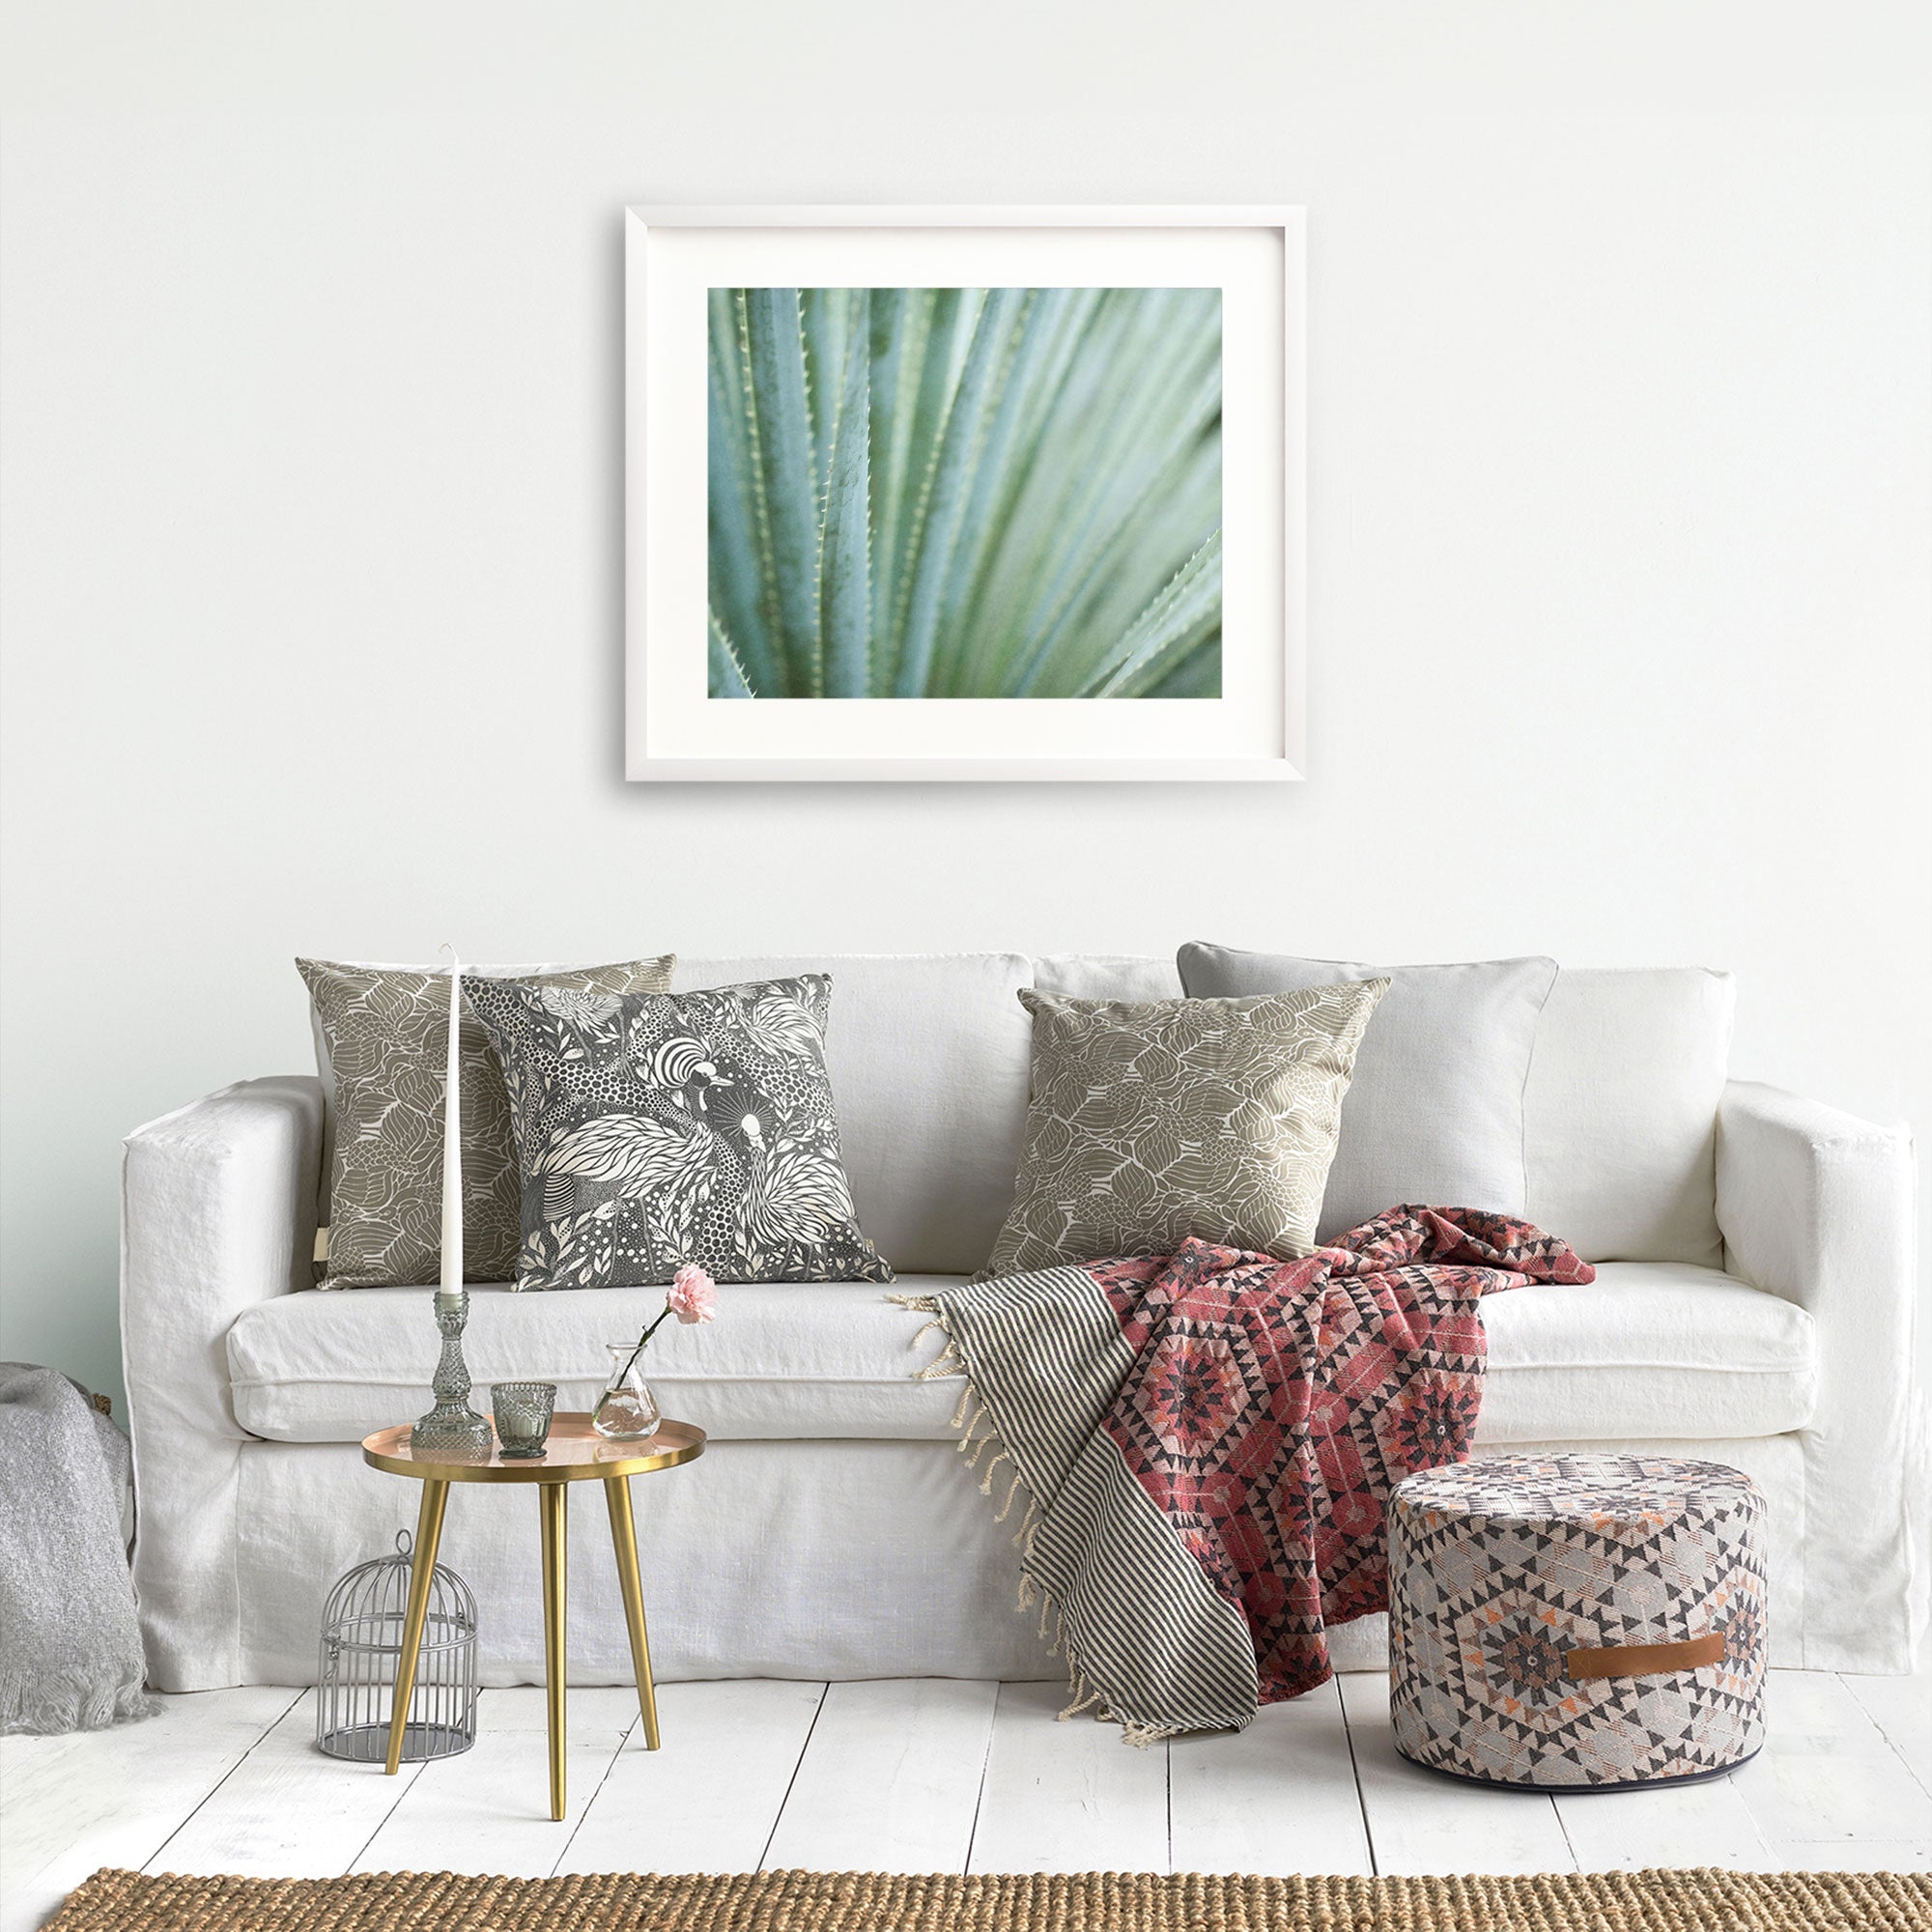 A cozy living room with a white sofa adorned with decorative pillows, a red patterned throw, a small round gold table with a vase and books, a pouf, and Offley Green's 'Strands and Spikes' Abstract Green Botanical Print.